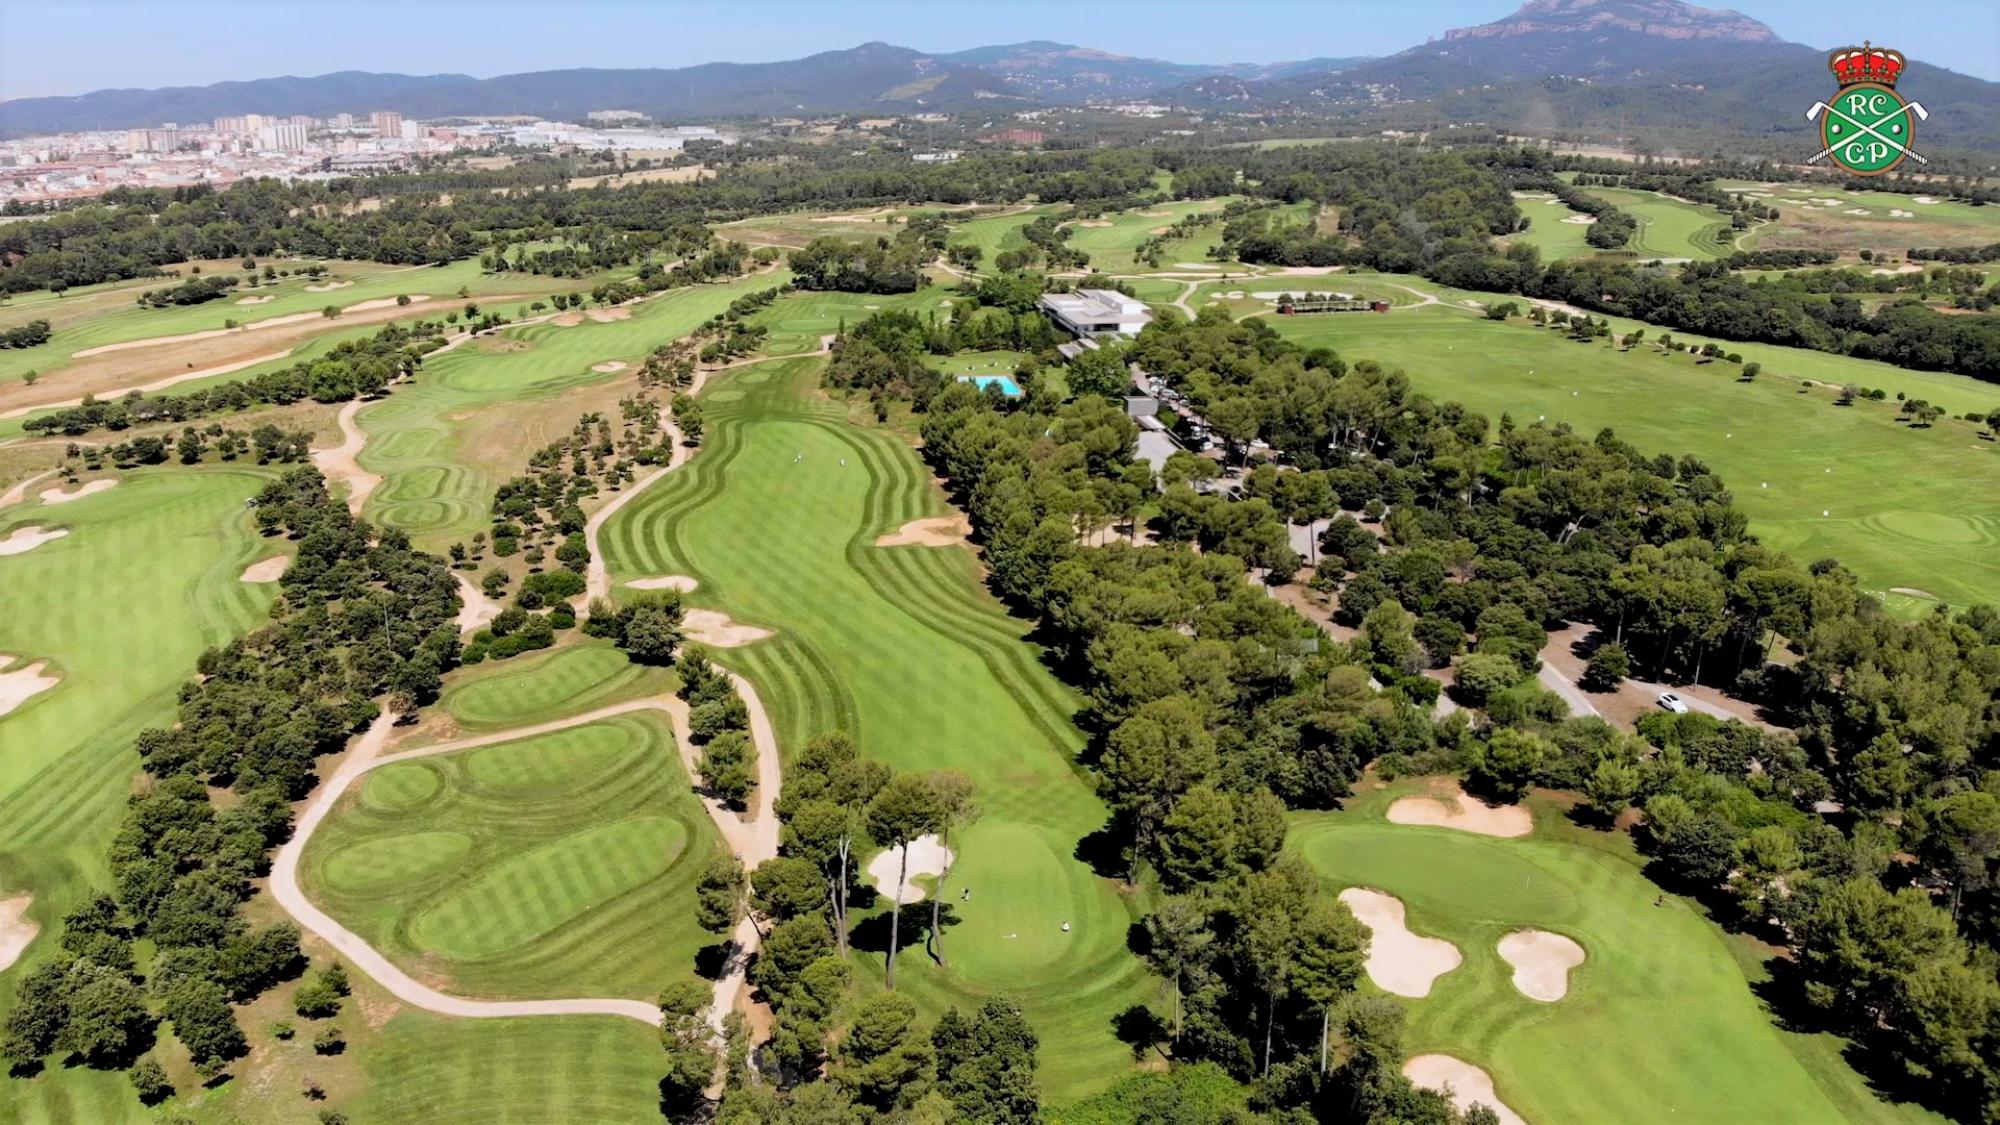 The El Prat Golf Club's beautiful golf course situated in marvelous Costa Brava.